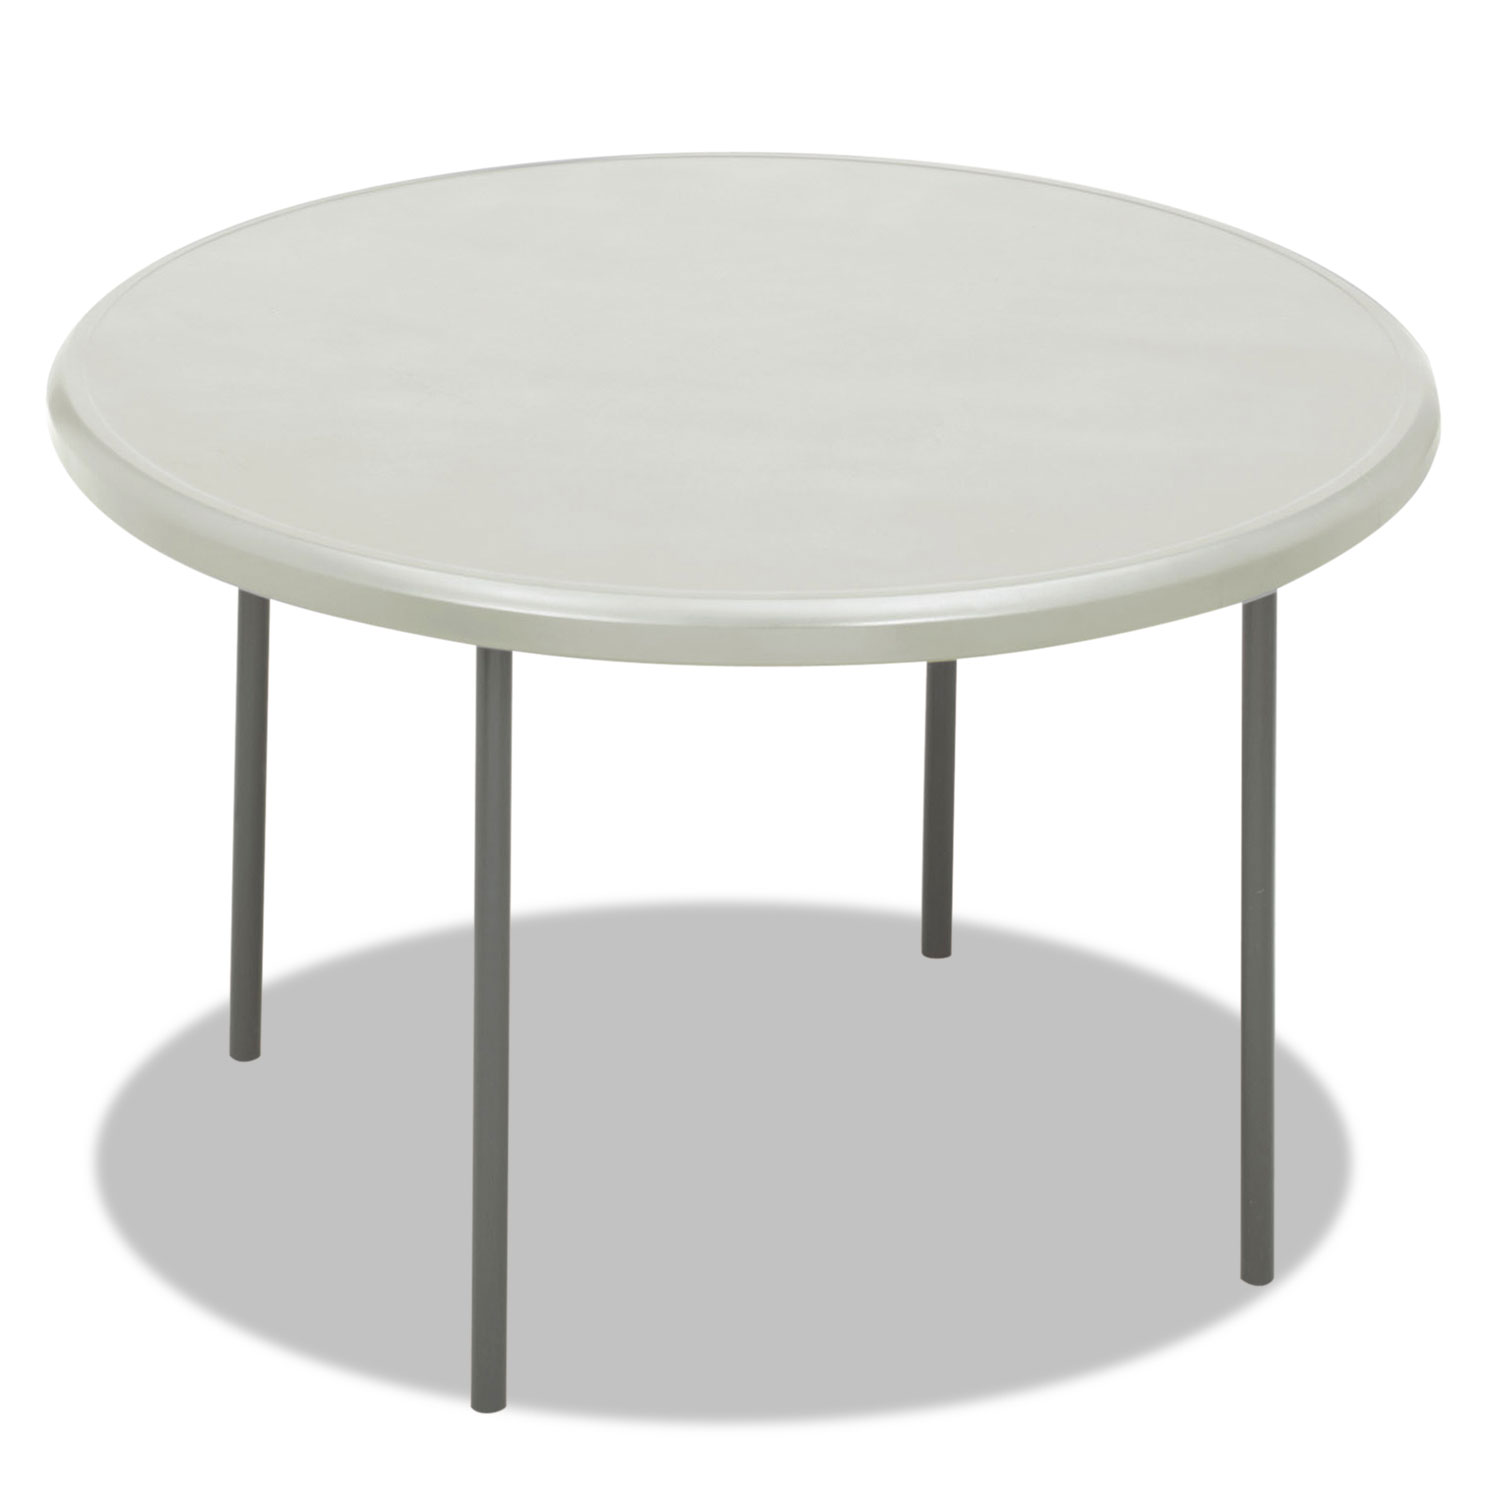 Iceberg ICE65243 IndestrucTables Too 1200 Series Resin Folding Table, 48 dia x 29h, Platinum